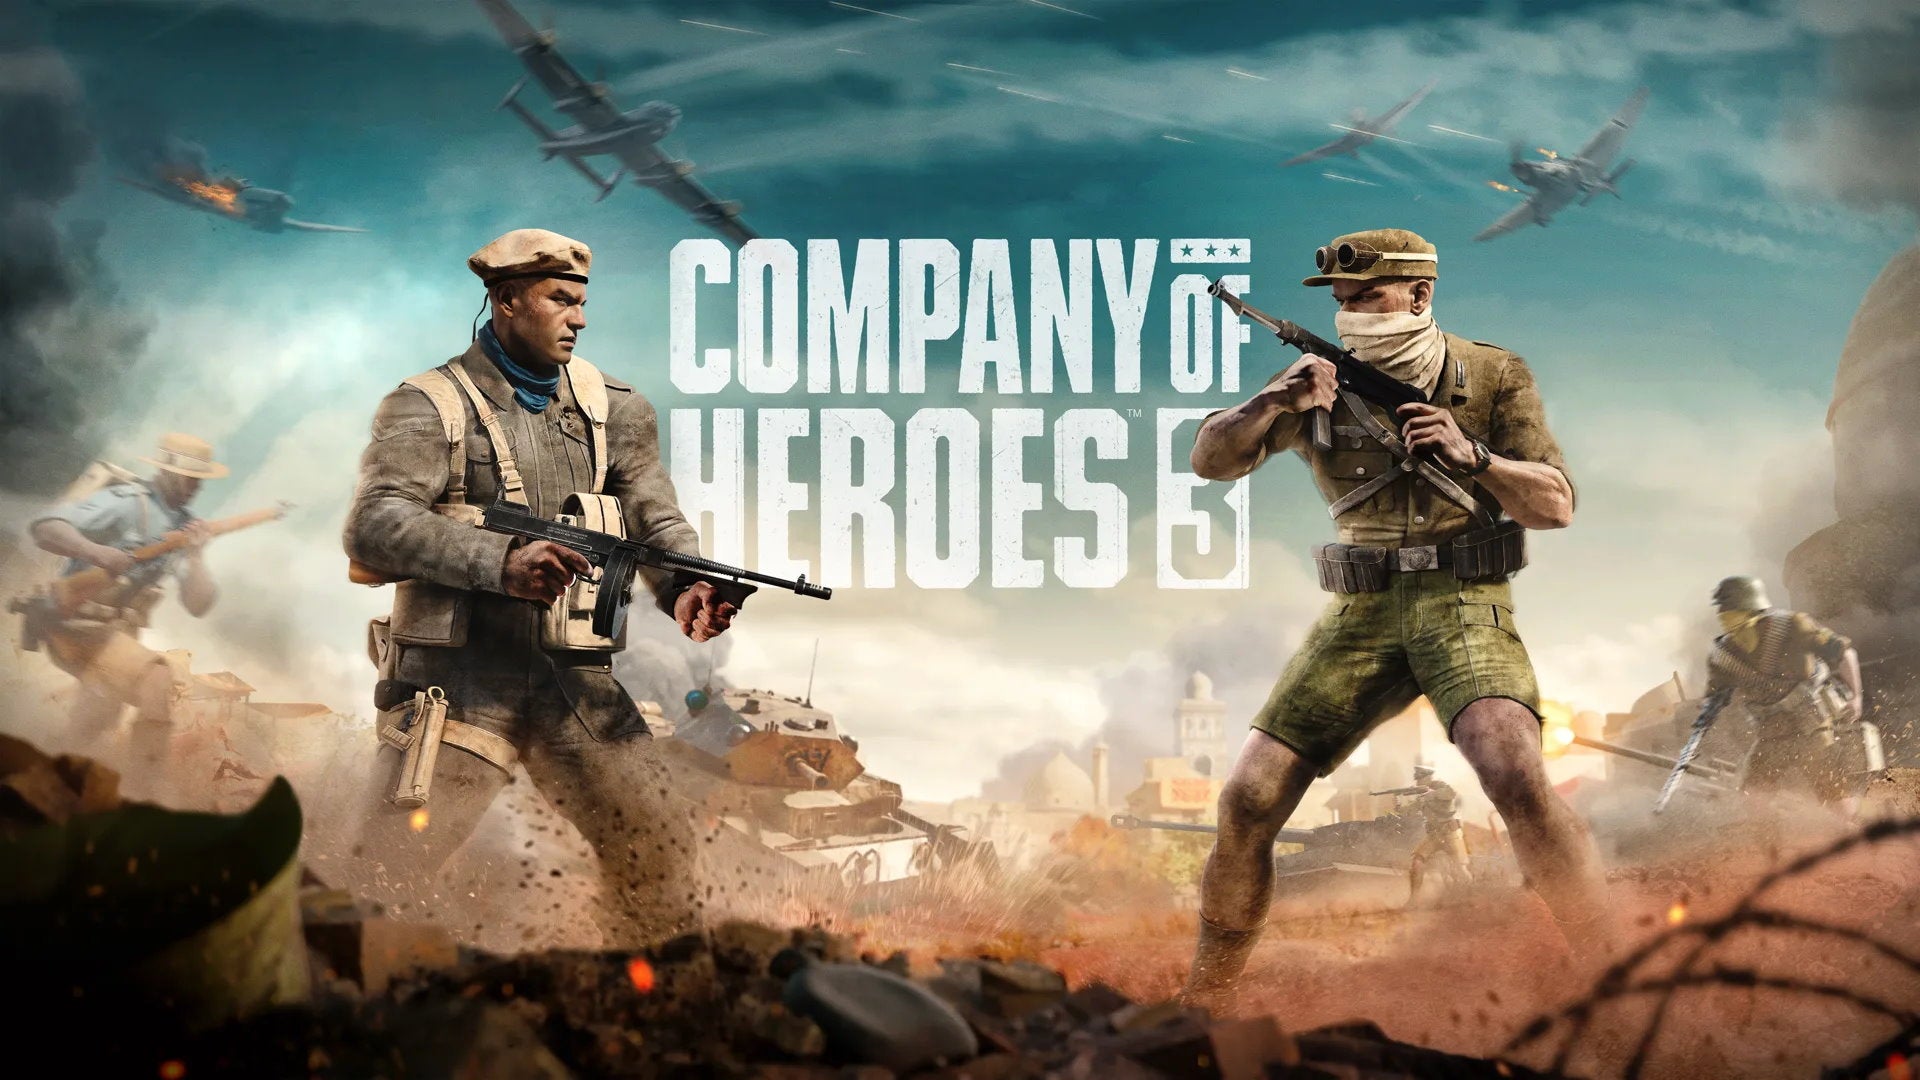 Two soldiers face each other in front of the Company Of Heroes 3 logo